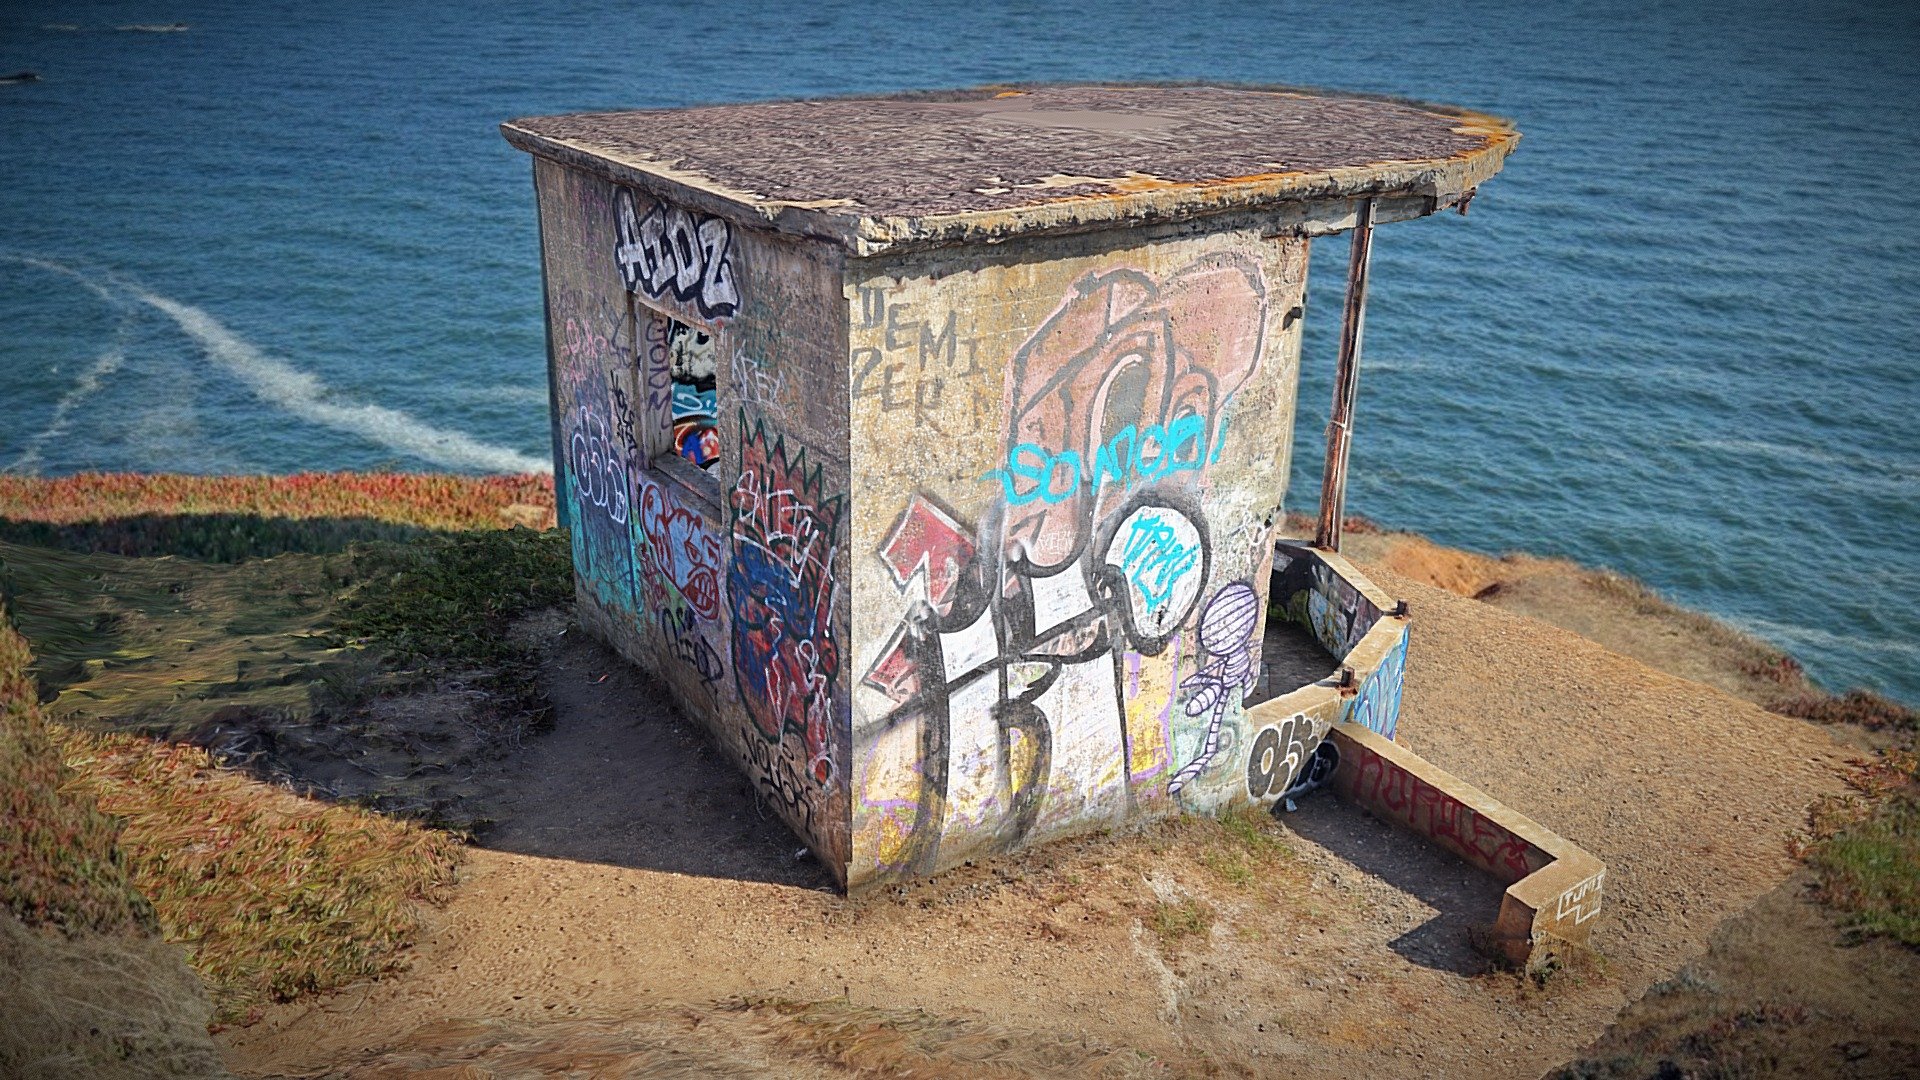 Military structure at Point Bonita cliff - CA